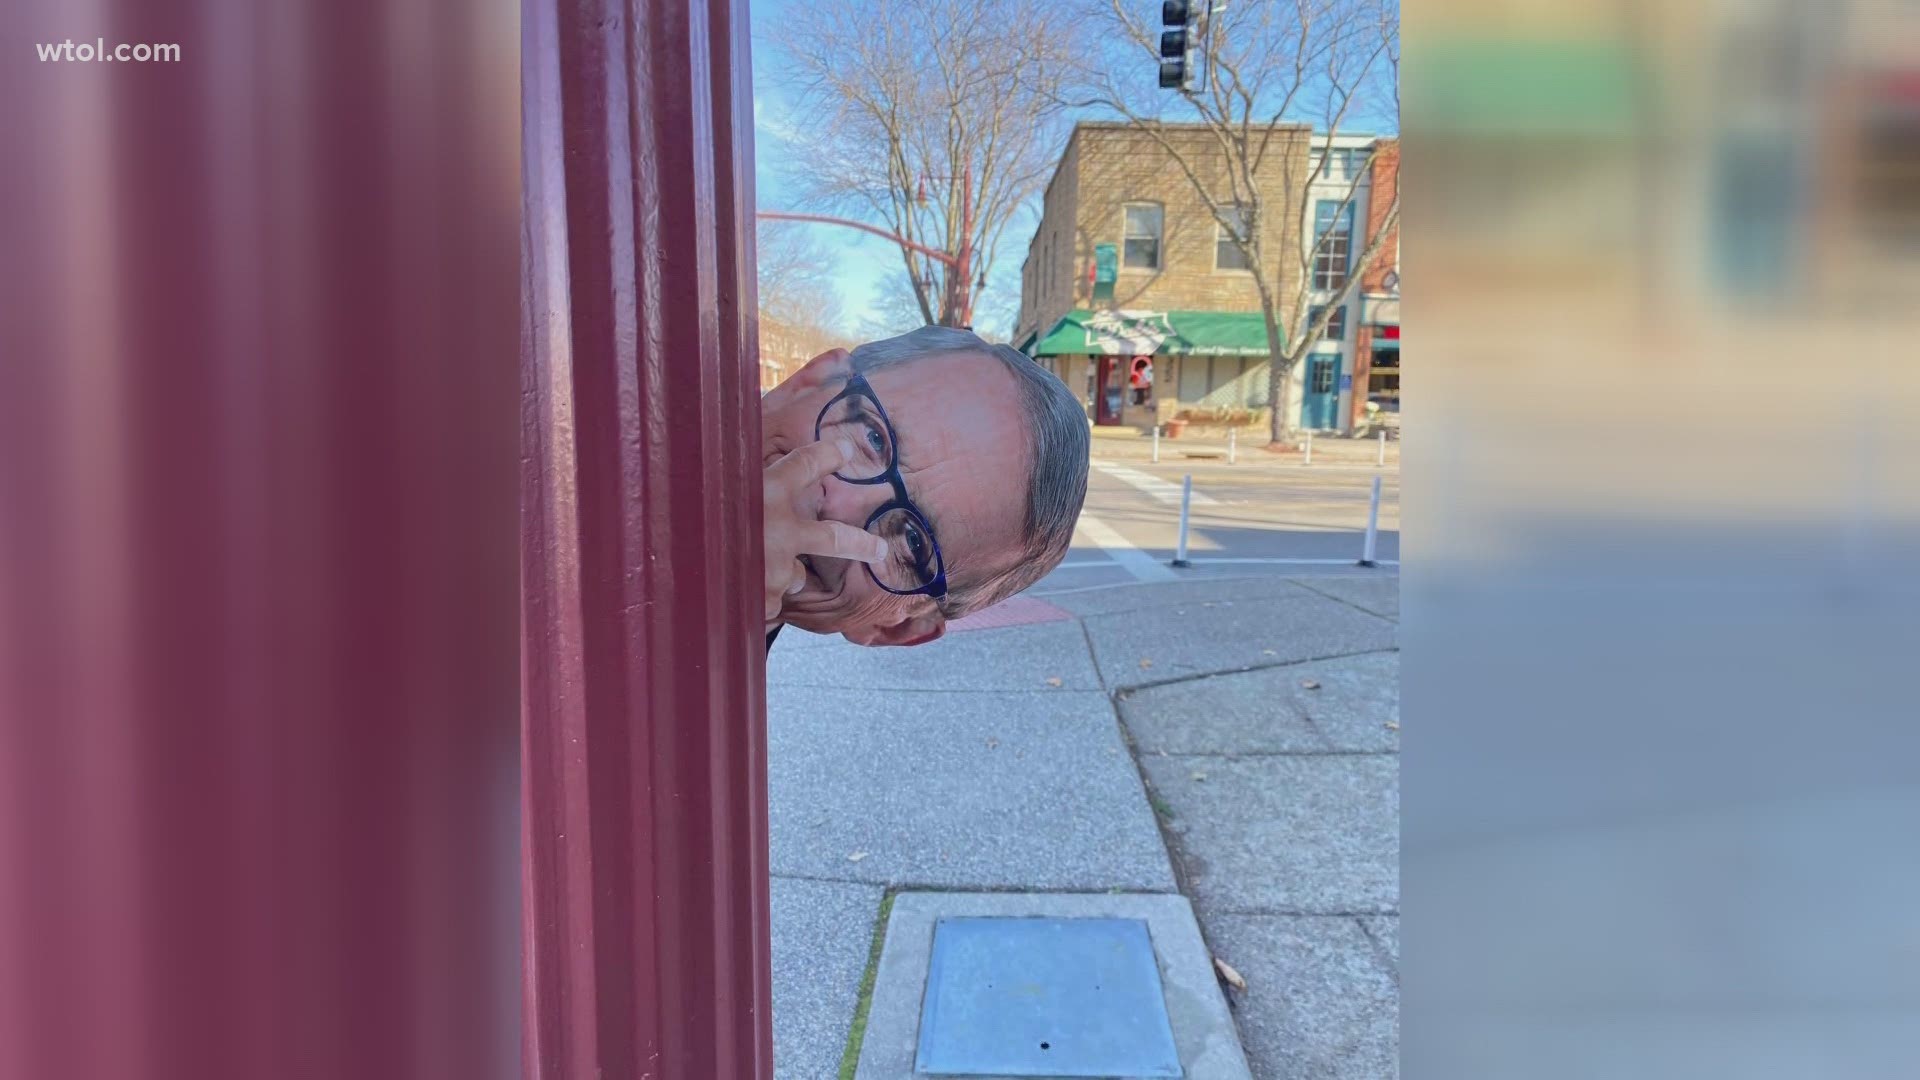 Gov. Mike DeWine made a special 'appearance' in uptown Maumee ahead of Ohio's curfew on Thursday. The appearance was the work of a lighthearted local photographer.